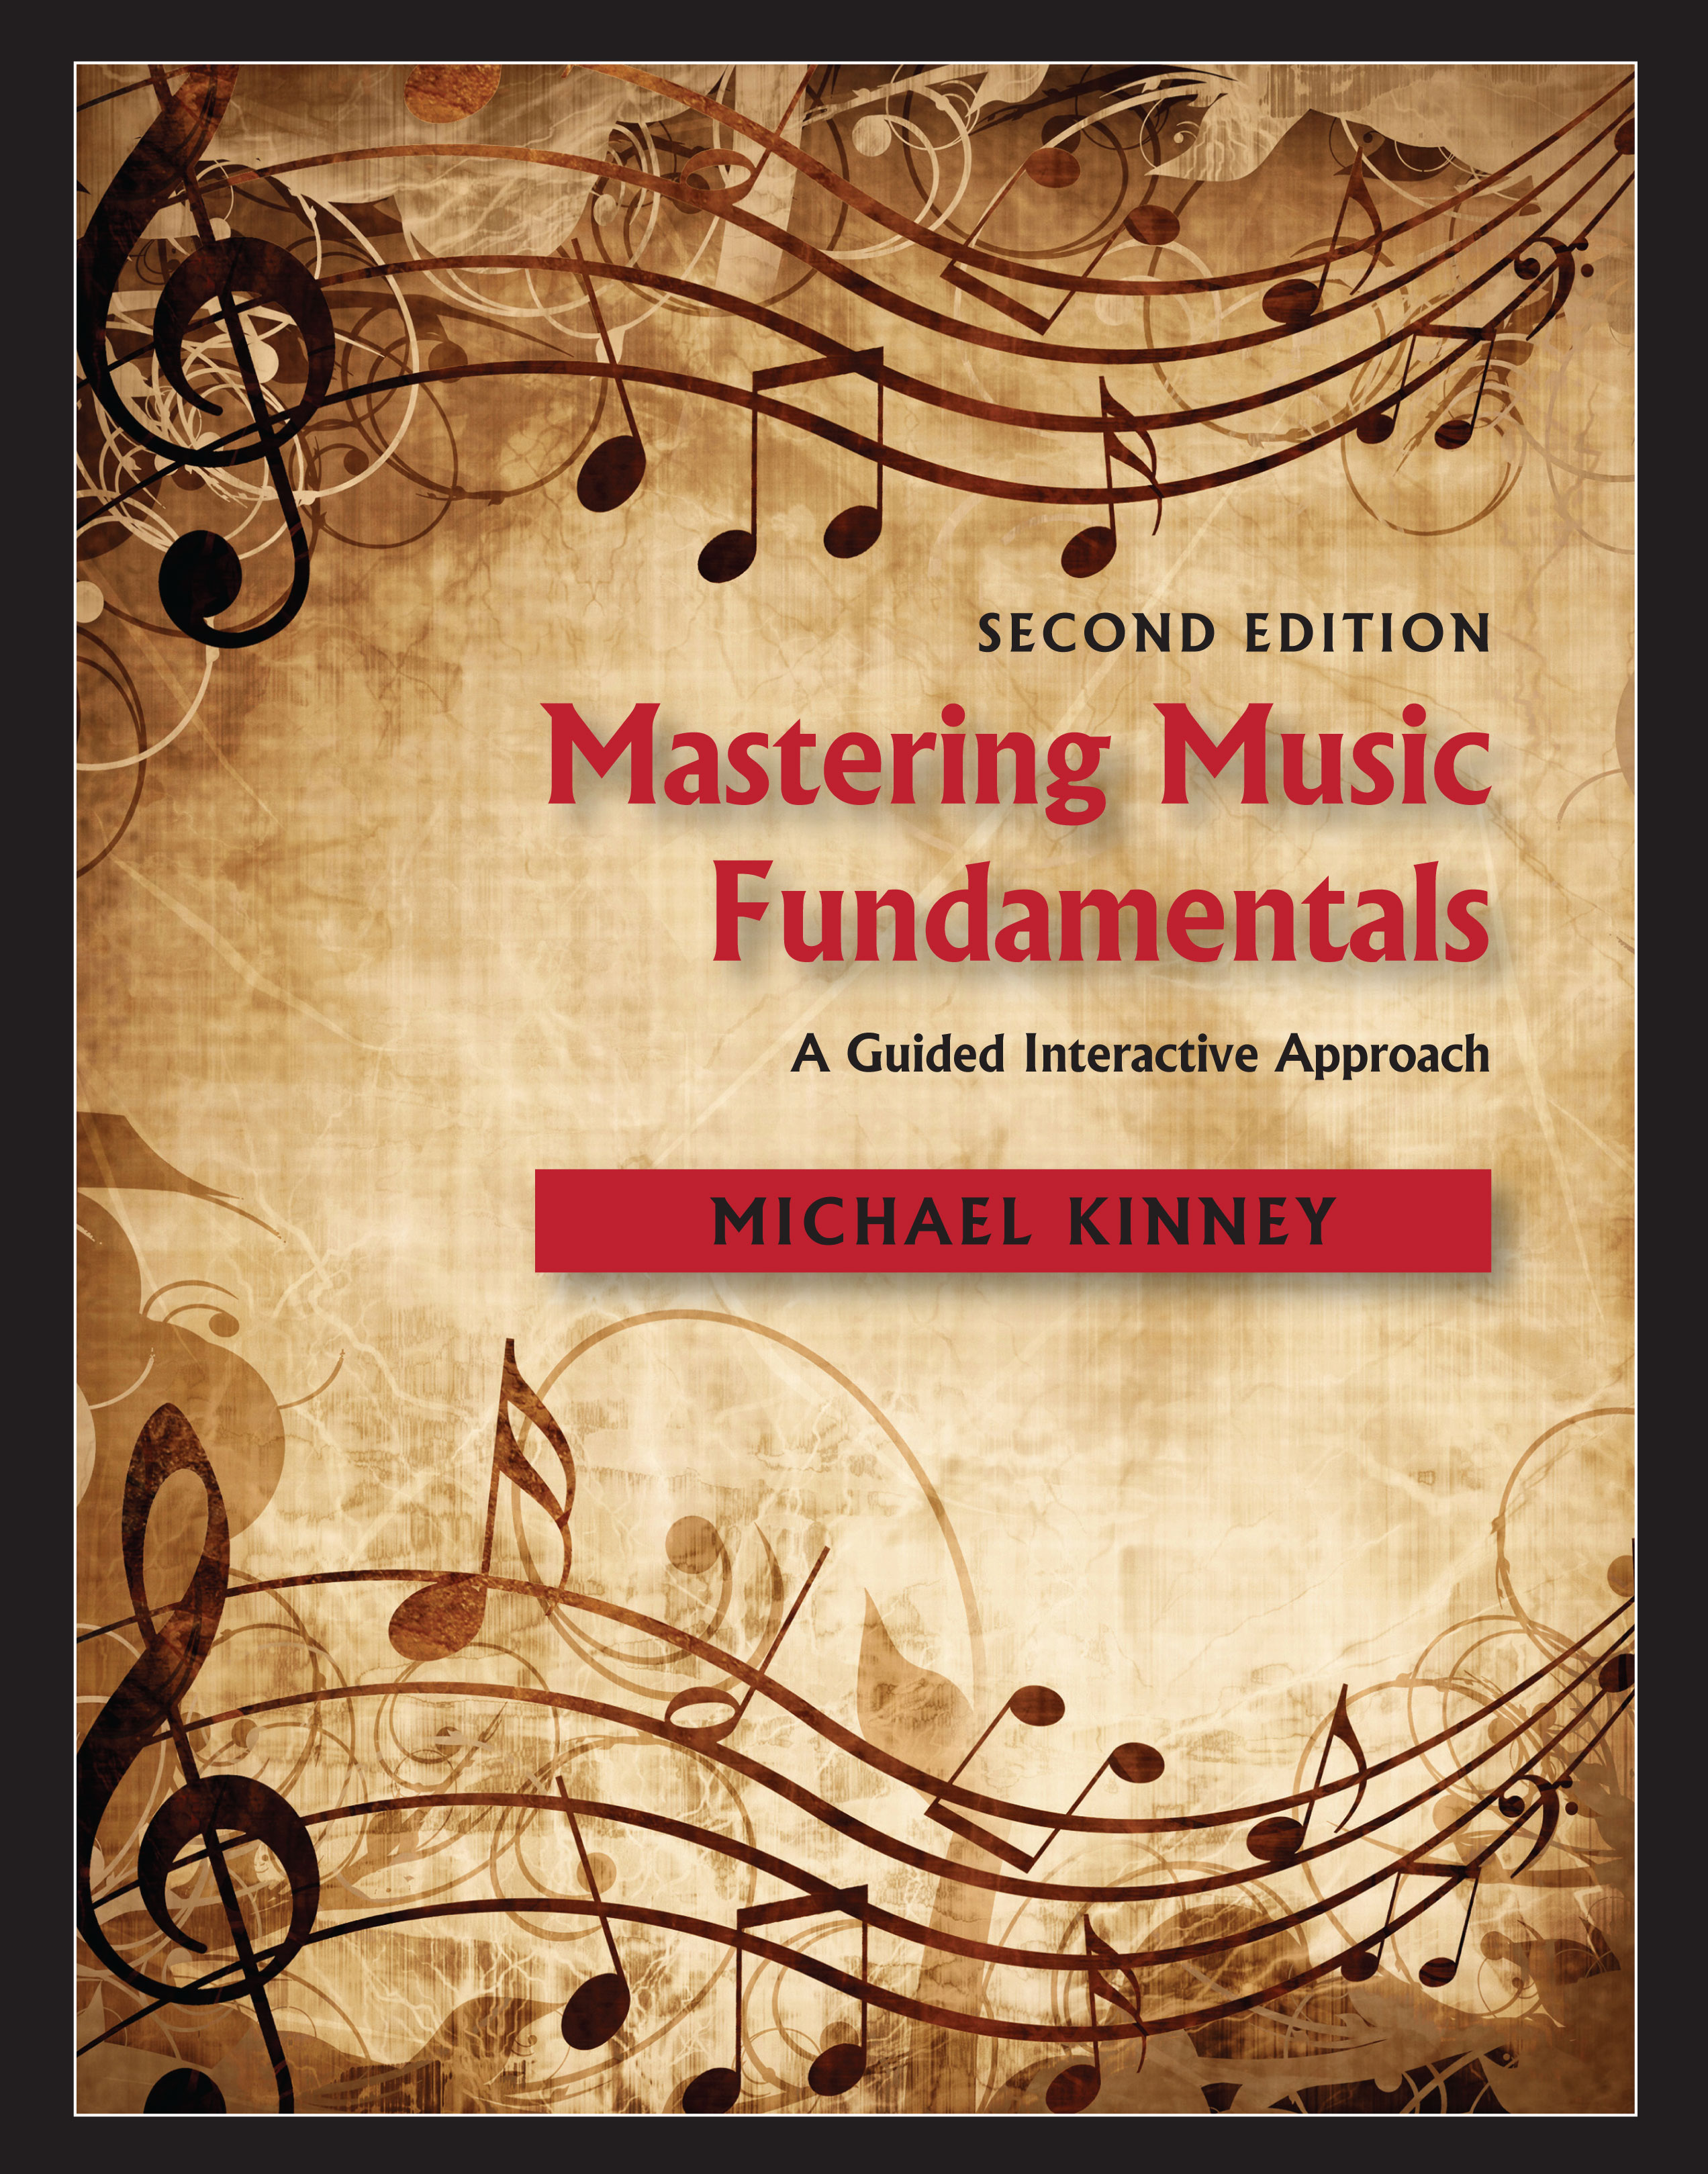 Mastering Music Fundamentals: A Guided Interactive Approach, Second Edition by Michael  Kinney